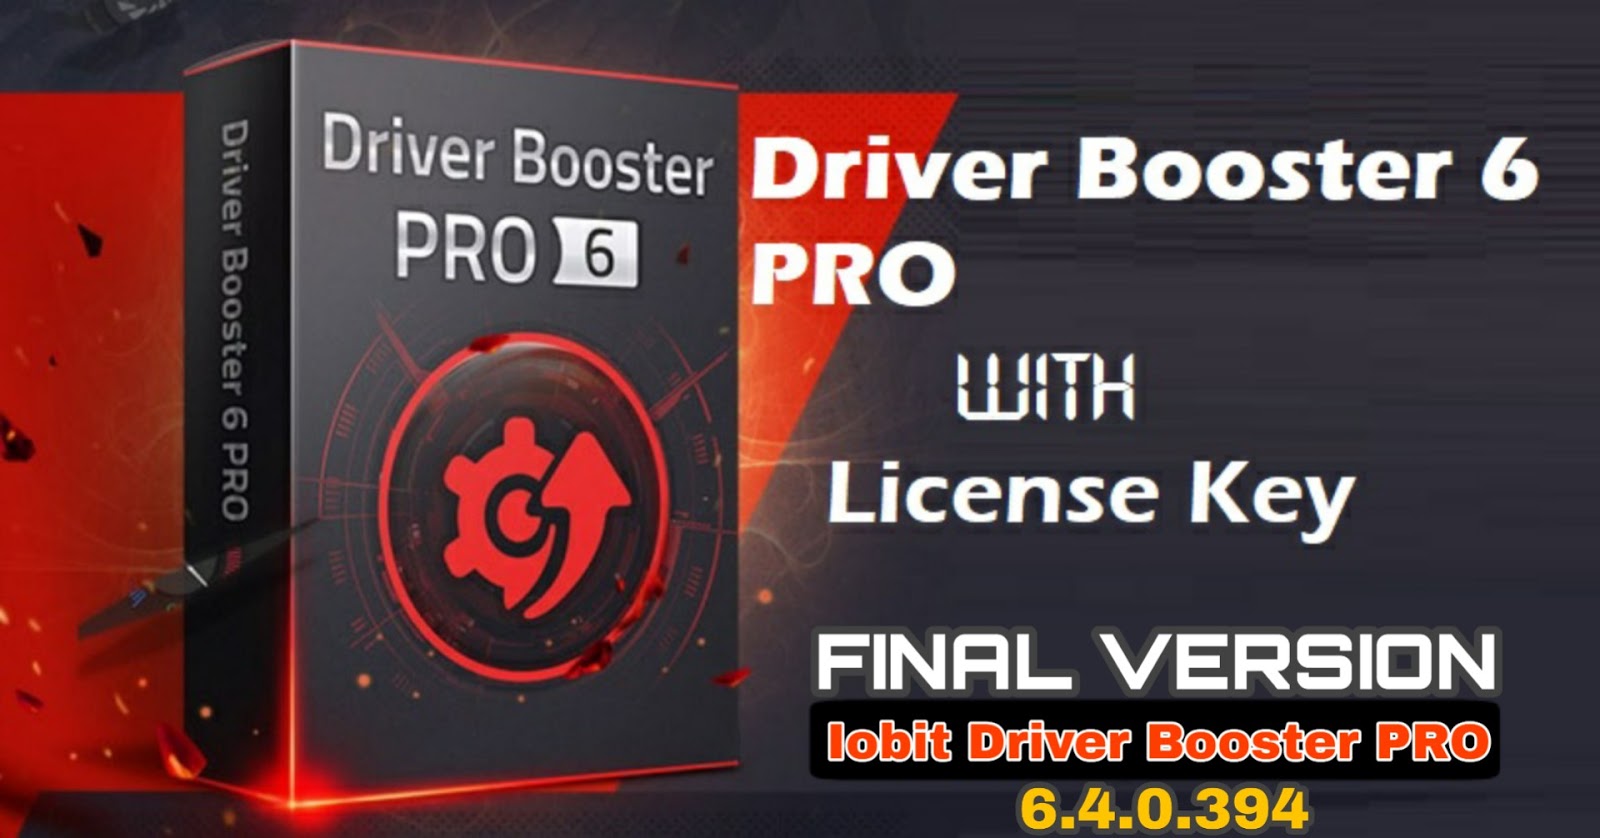 iobit driver booster pro full